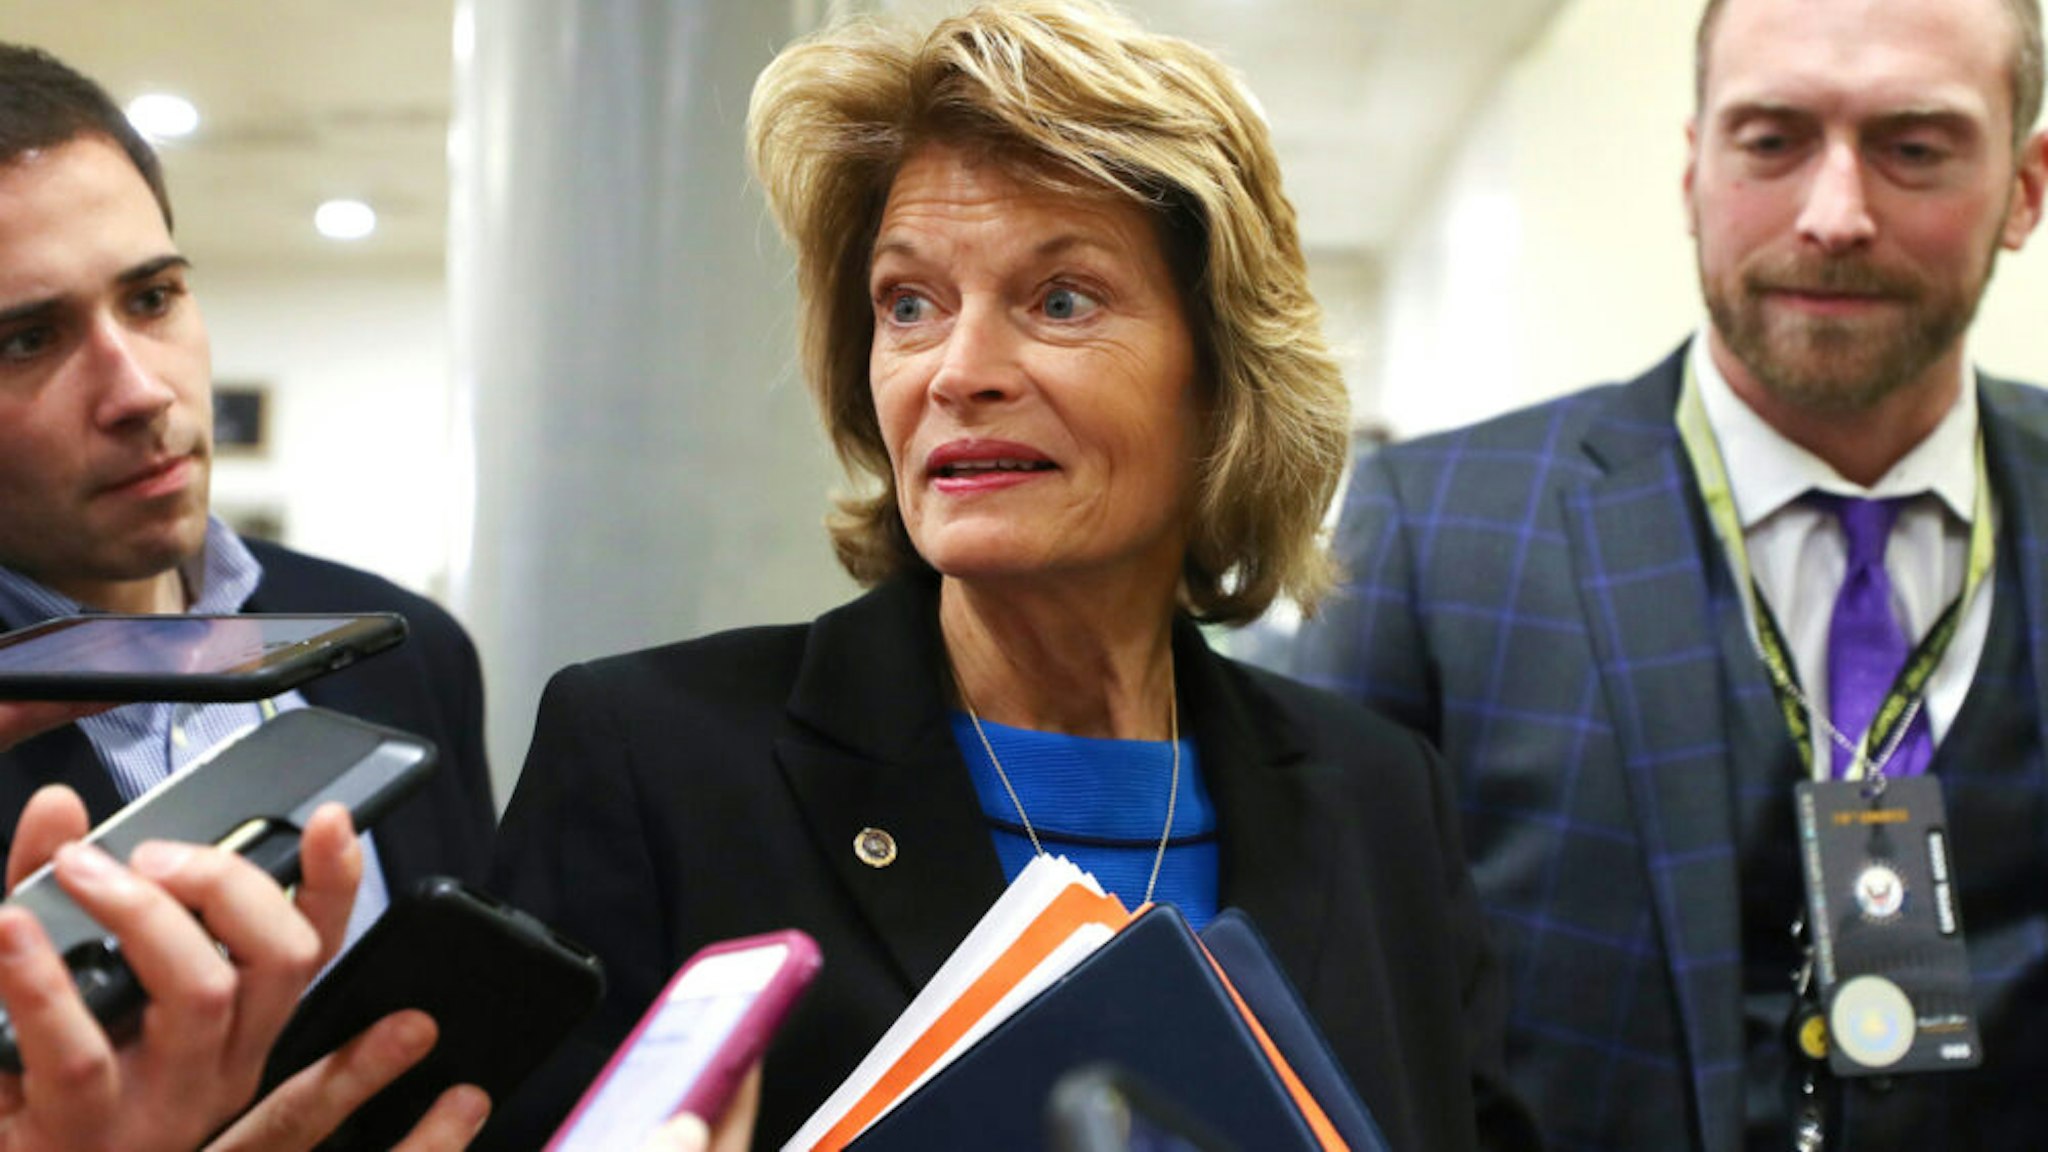 WASHINGTON, DC - JANUARY 29: Sen. Lisa Murkowski (R-AK) speaks to reporters as she arrives for the continuation of the Senate impeachment trial of President Donald Trump at the U.S. Capitol on January 29, 2020 in Washington, DC. The next phase of the trial, in which senators will be allowed to ask written questions, will extend into tomorrow.